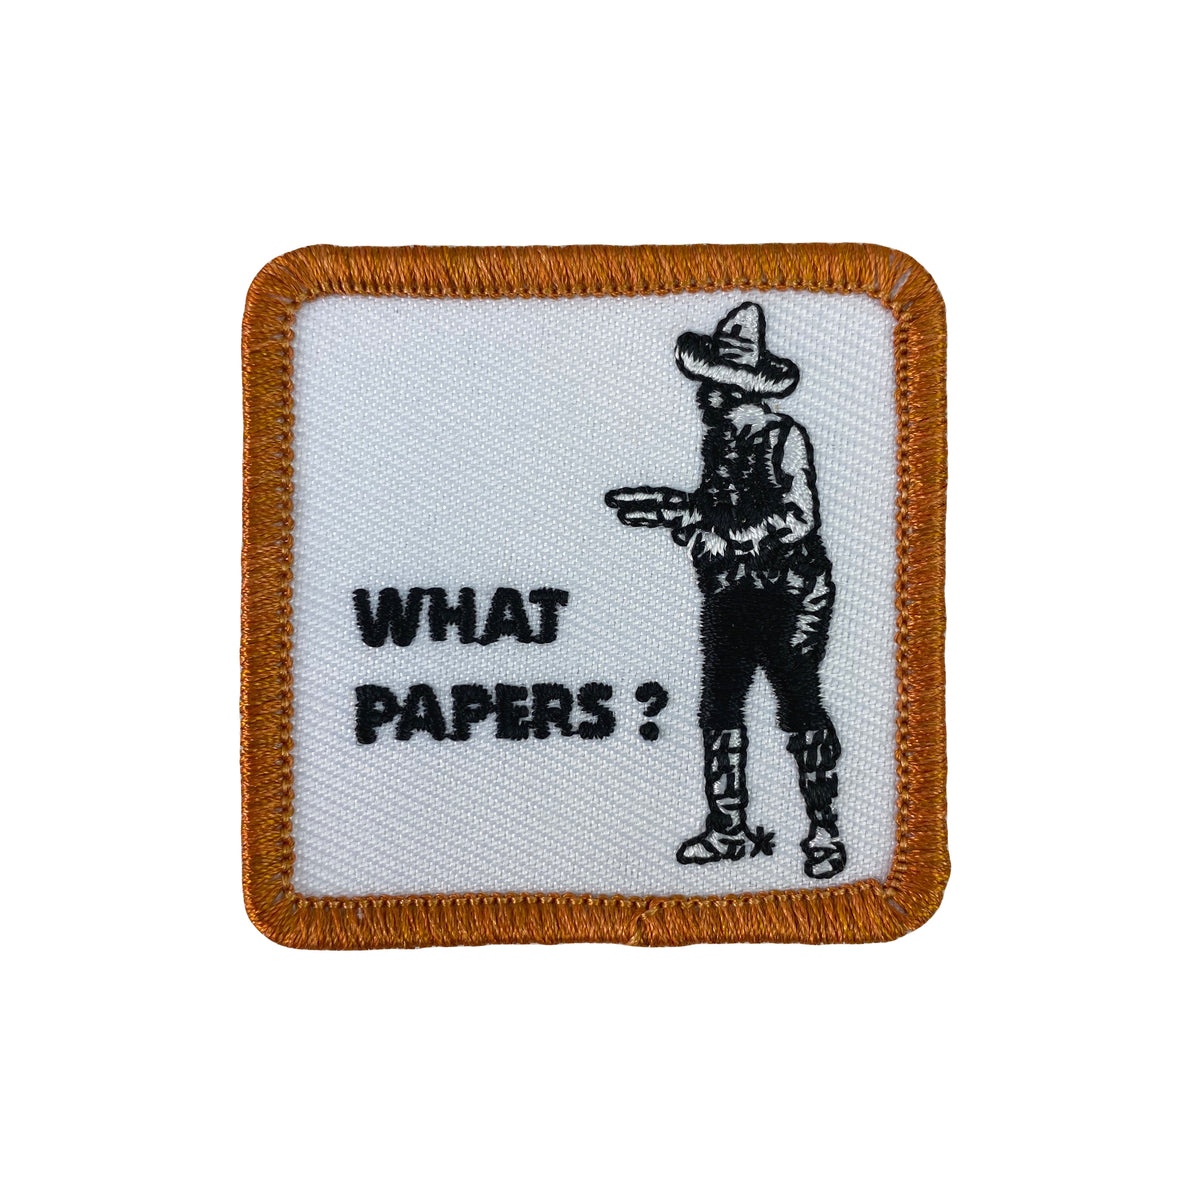 WHAT PAPERS ? ~ 2" X 2"